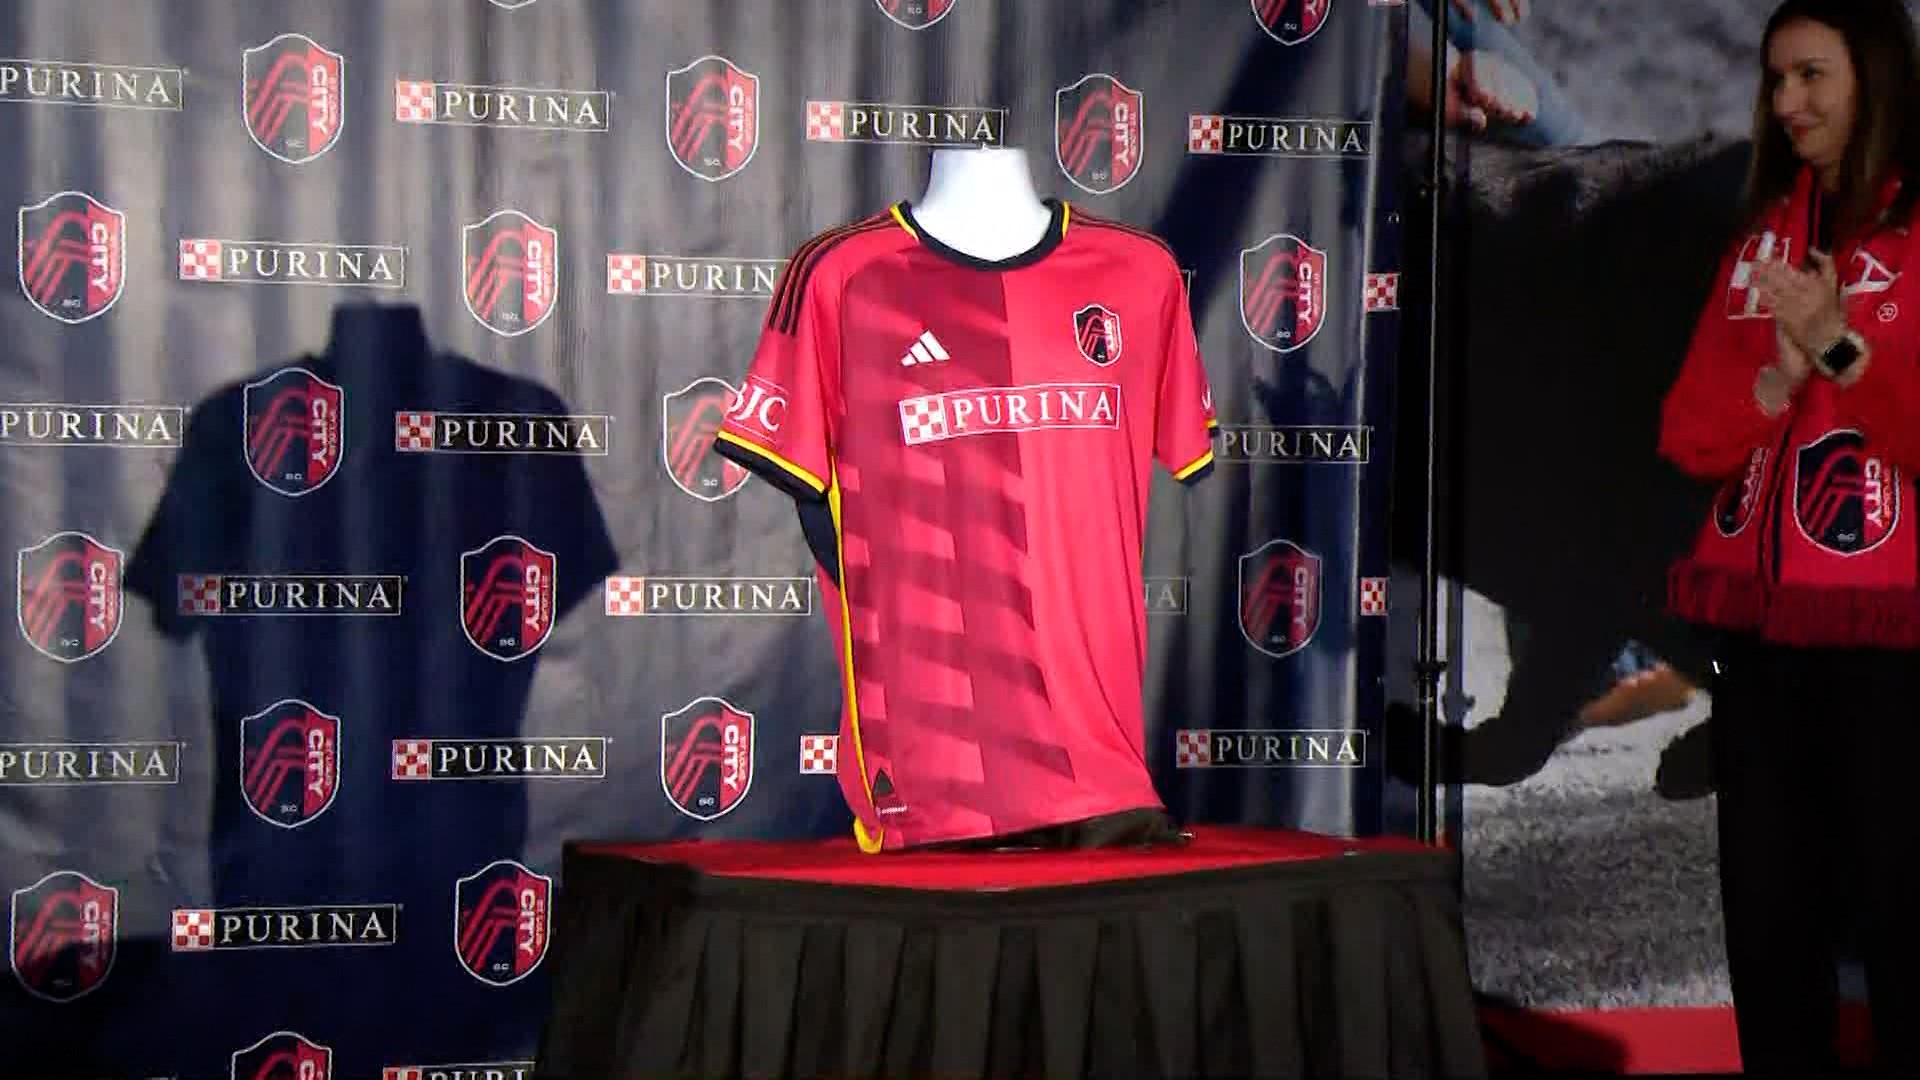 St. Louis CITY SC unveiled its first primary kit on Wednesday. The jersey features the club’s signature red color with navy and yellow accents.